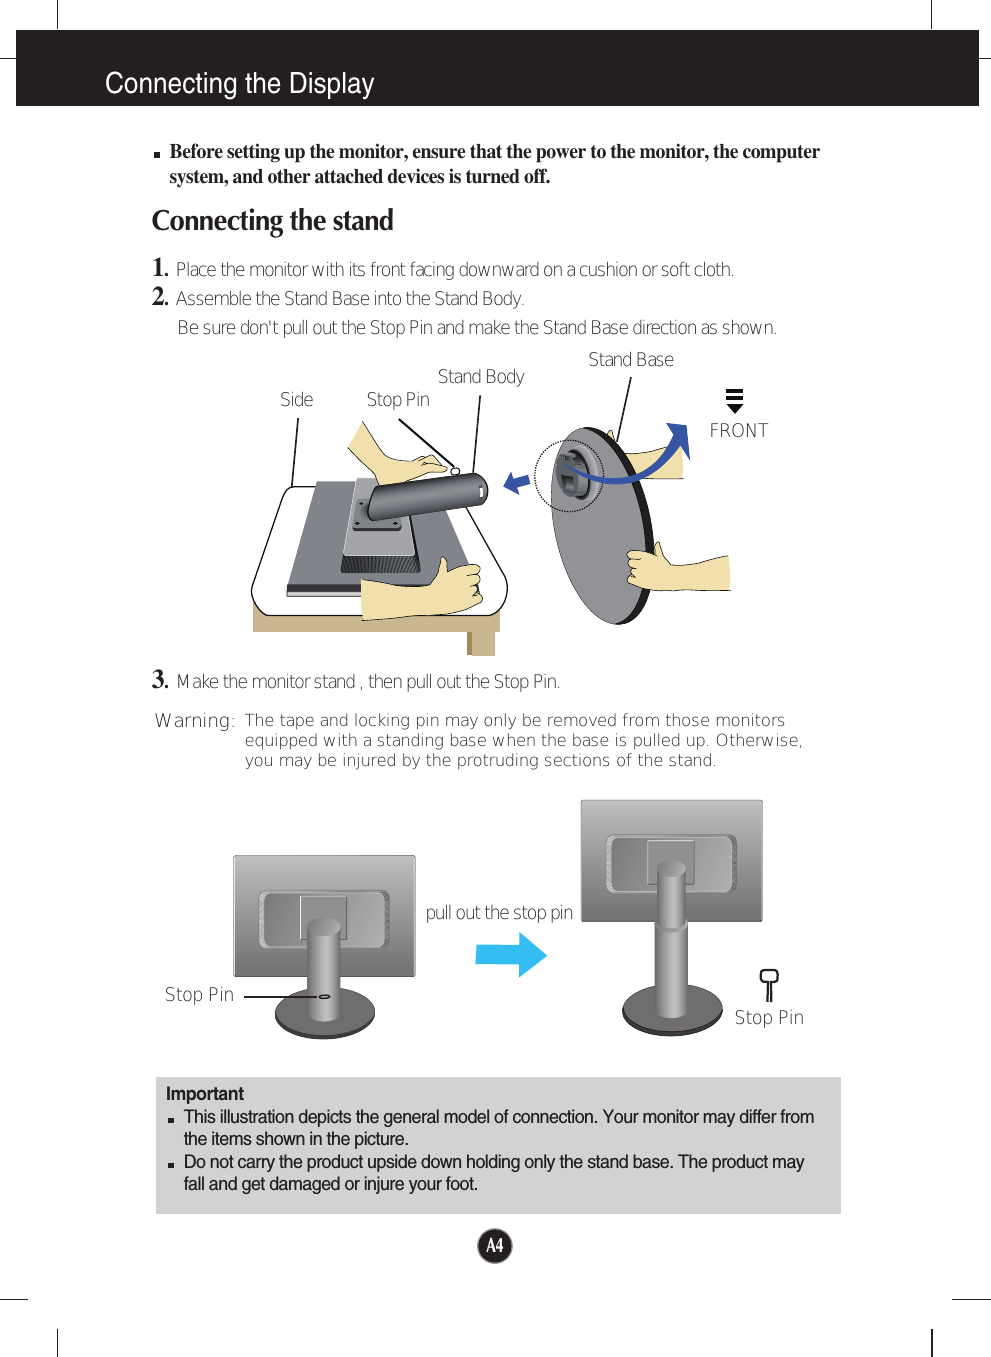 A4A4Connecting the DisplayImportantThis illustration depicts the general model of connection. Your monitor may differ fromthe items shown in the picture.Do not carry the product upside down holding only the stand base. The product mayfall and get damaged or injure your foot.Before setting up the monitor, ensure that the power to the monitor, the computersystem, and other attached devices is turned off.Connecting the stand 1.  Place the monitor with its front facing downward on a cushion or soft cloth.2.Assemble the Stand Base into the Stand Body.Be sure don&apos;t pull out the Stop Pin and make the Stand Base direction as shown. 3.Make the monitor stand , then pull out the Stop Pin.Stand BaseFRONTStand BodyStop PinSideStop Pin Stop Pinpull out the stop pinThe tape and locking pin may only be removed from those monitorsequipped with a standing base when the base is pulled up. Otherwise,you may be injured by the protruding sections of the stand.Warning: